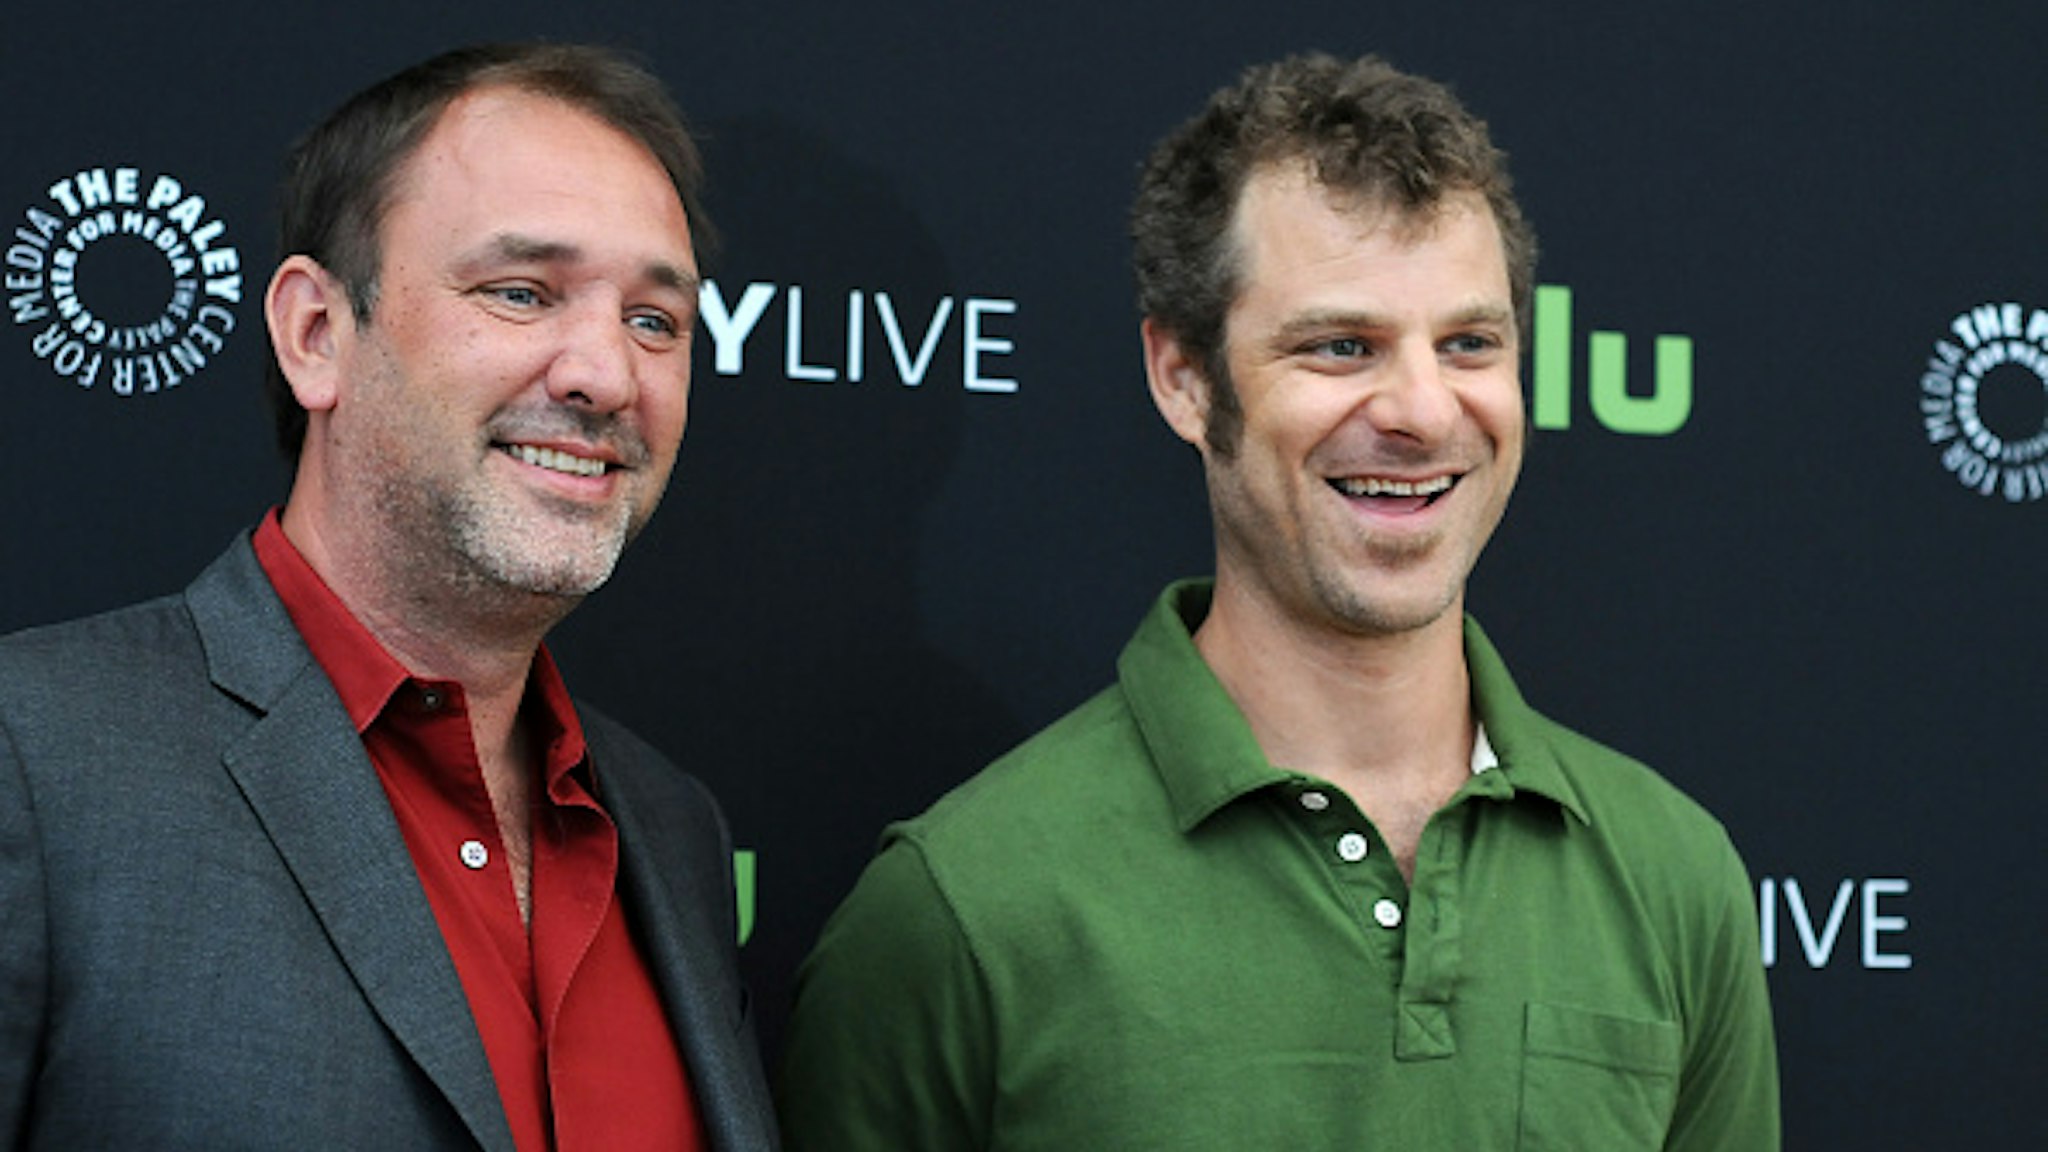 BEVERLY HILLS, CA - SEPTEMBER 01: Trey Parker and Matt Stone attend the The Paley Center for Media presents a special retrospective event honoring 20 seasons of "South Park" at The Paley Center for Media on September 1, 2016 in Beverly Hills, California.